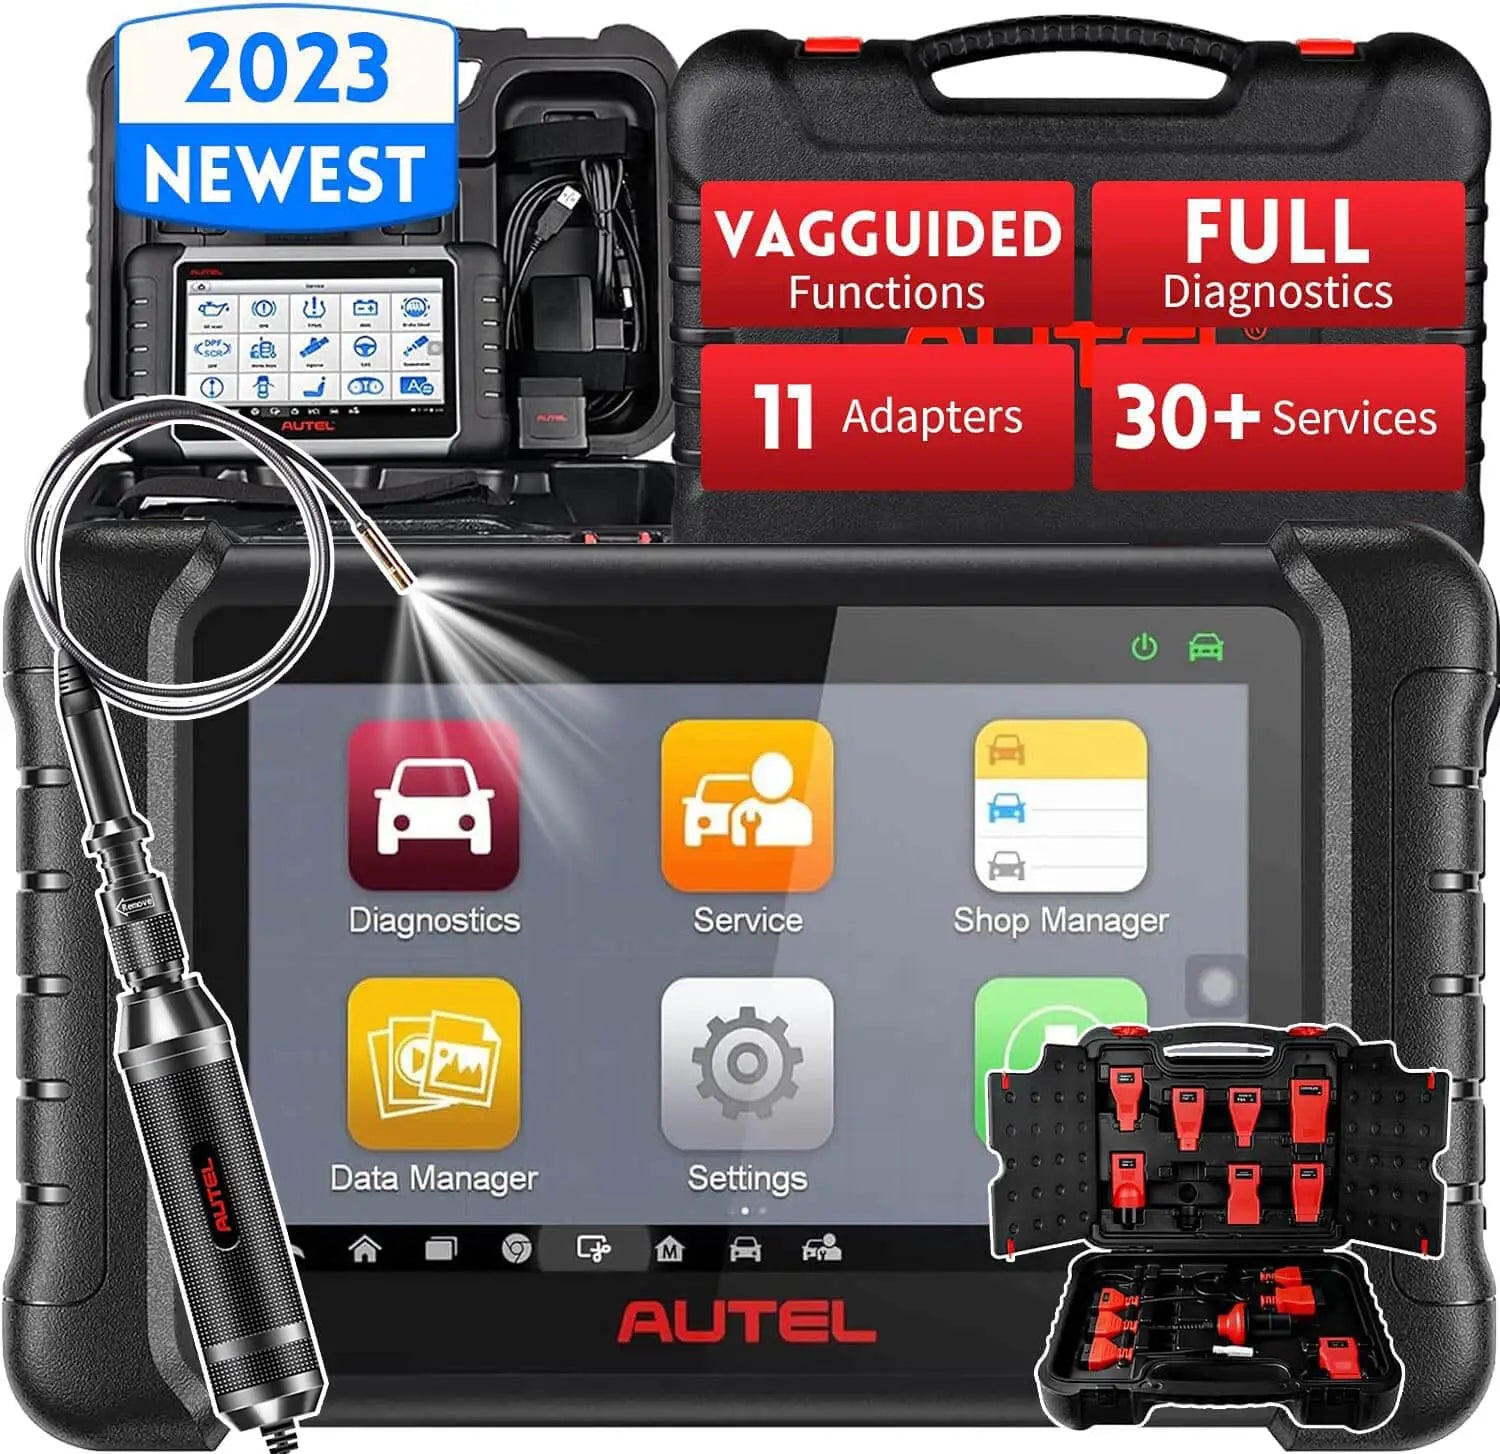 Autel MaxiCOM MK906 Pro, 2023 New Diagnostic Scanner Upgrade of Autel MaxiSys MS906BT/MS906 Pro, with ECU Coding, 36+ Services, Bi-Directional Control, Print via Wi-Fi, All System with CAN FD & DoIP